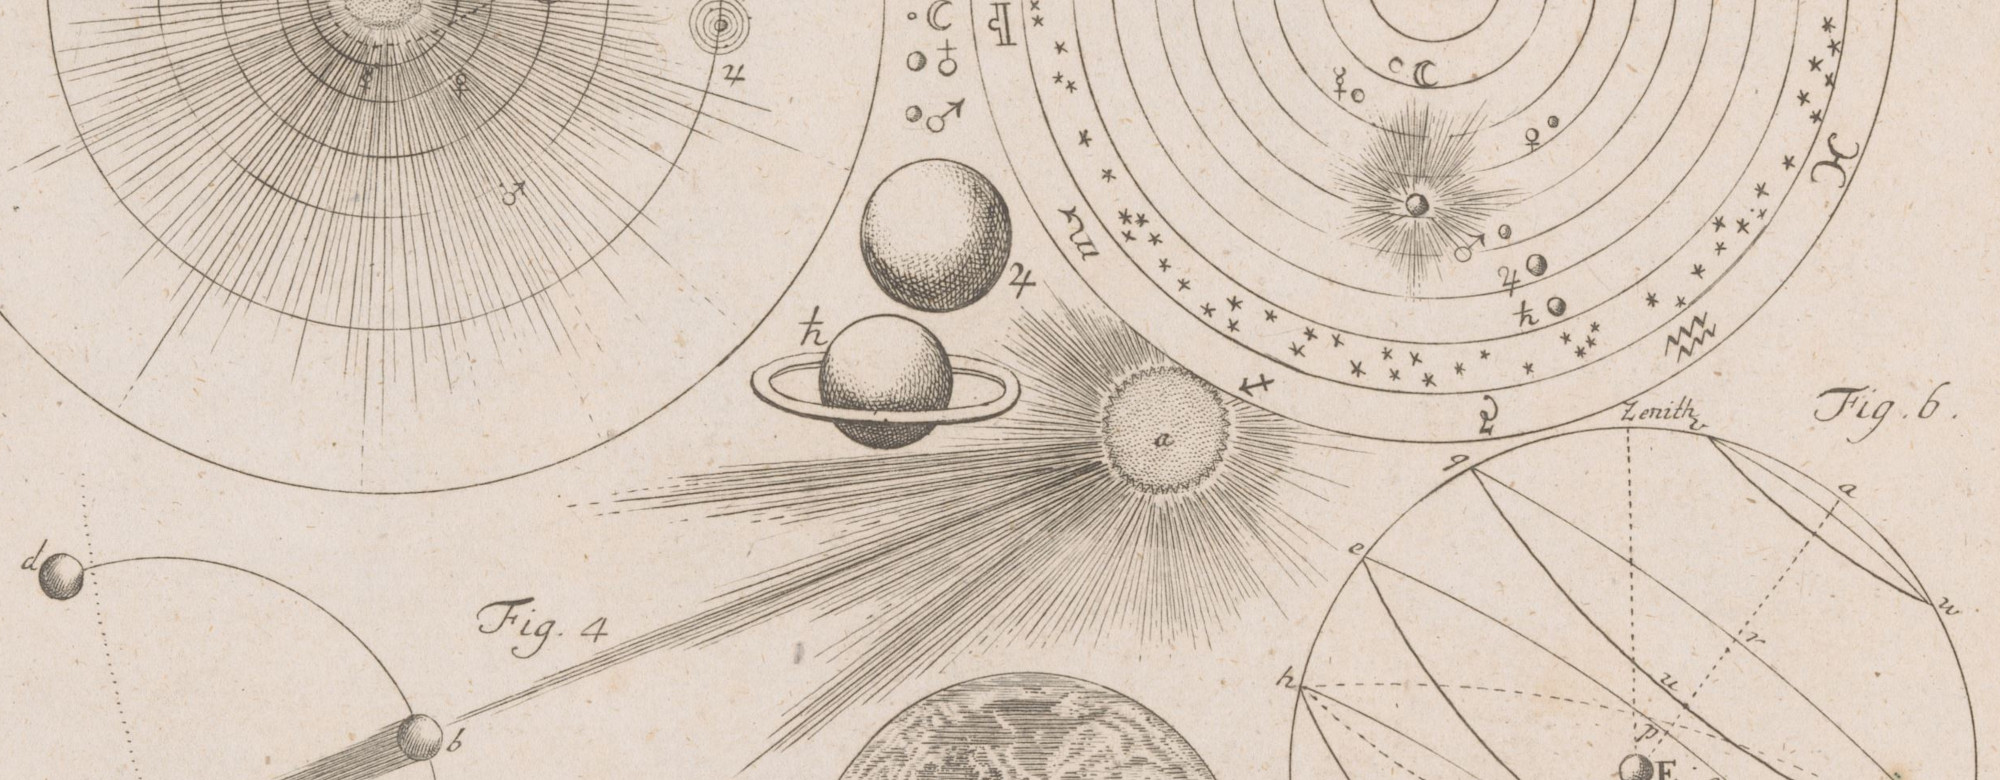 Encyclopedic drawing of the moon and planets